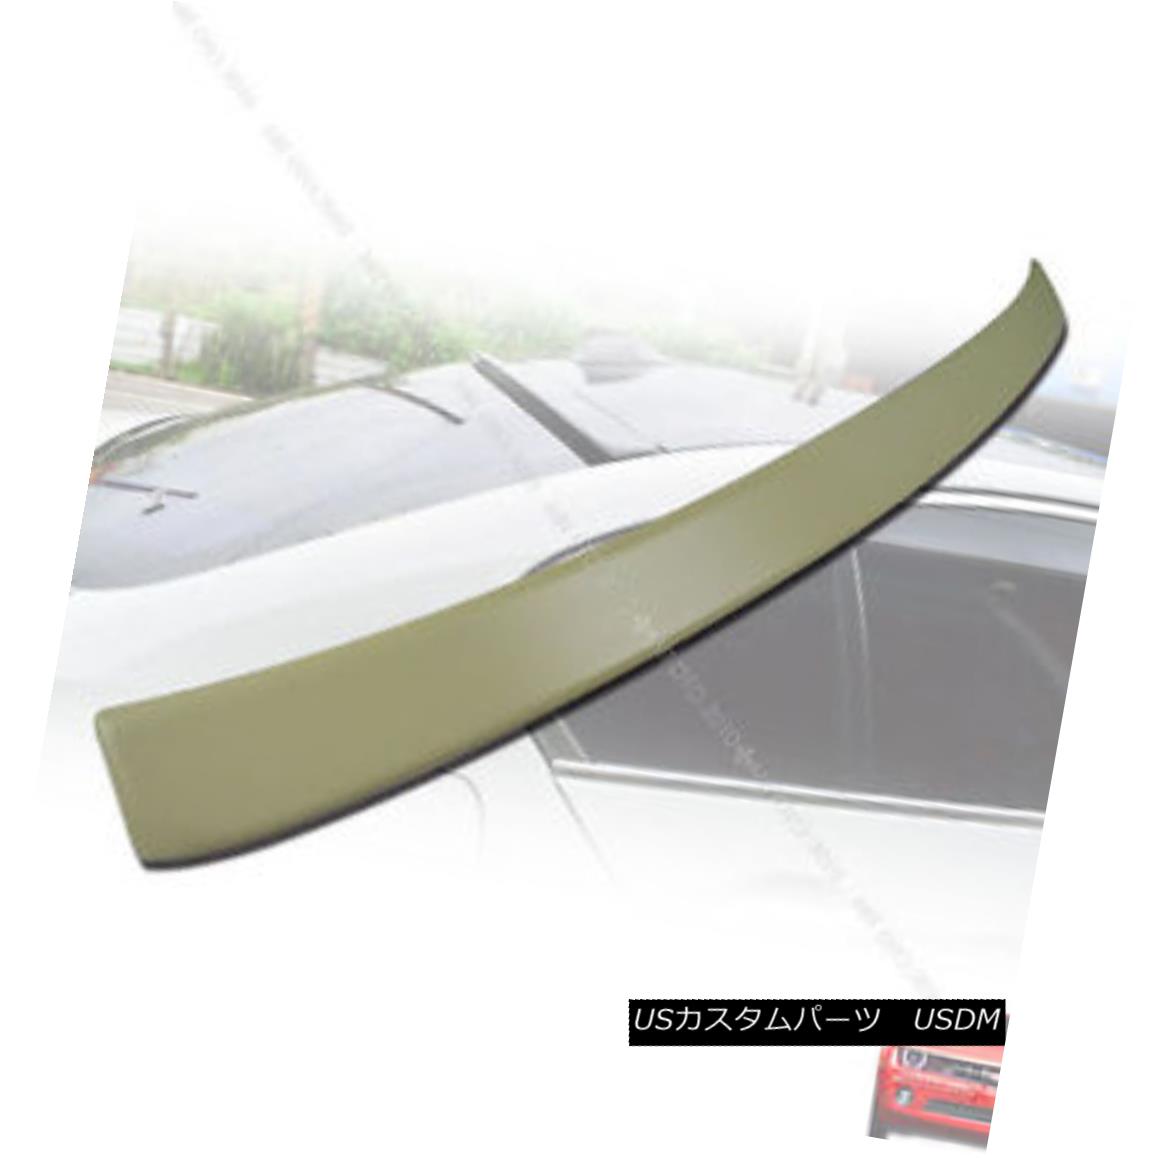 ѡ BMW NEW F10 5er A Roof Spoiler Silver Painted Color Code 354 2010-2016 BMW NEW F10 5er롼եݥ顼С顼354 2010-2016